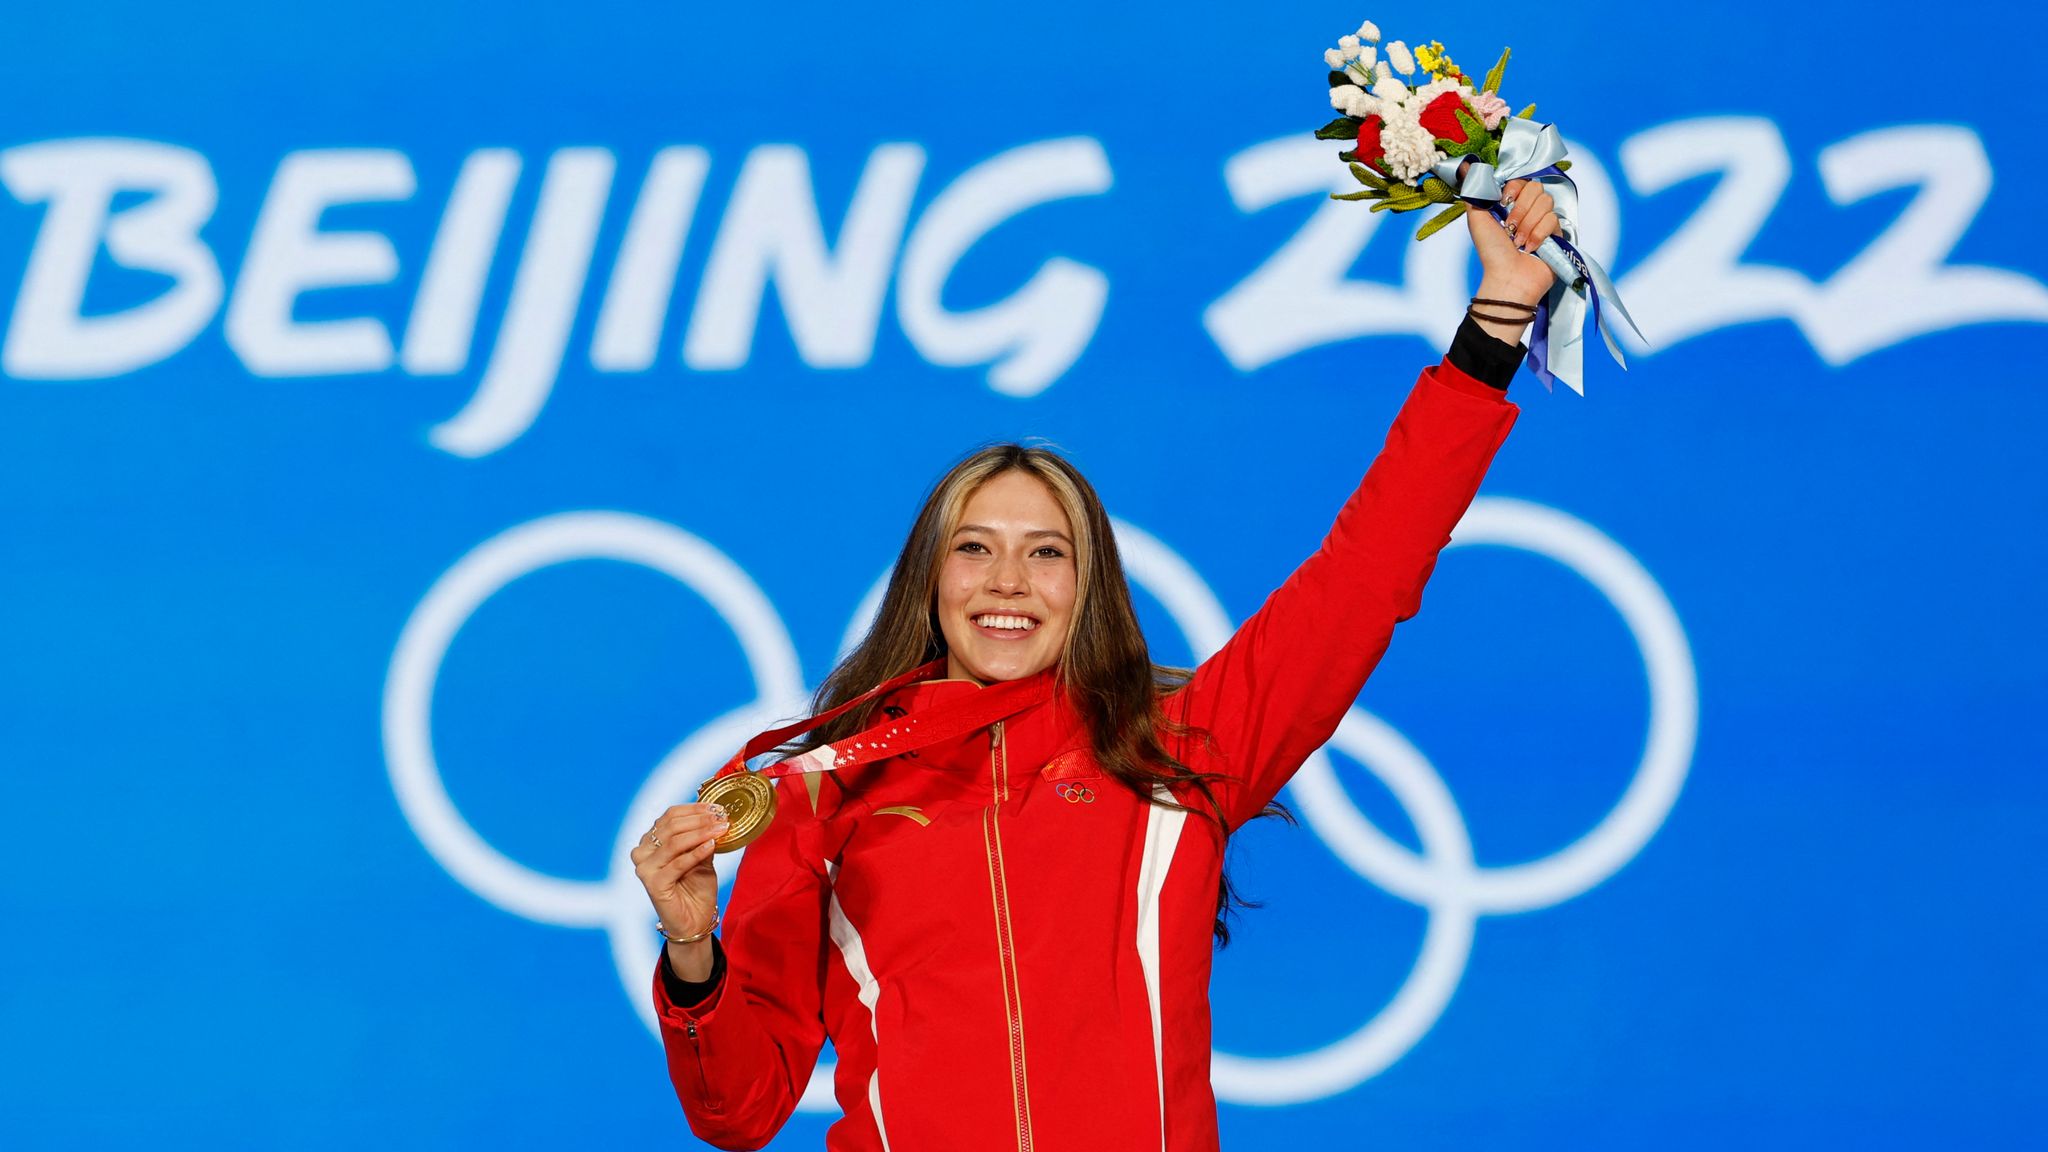 Winter Olympics 2022: Freestyle skier Eileen Gu causes controversy by  competing for China despite being born in US, US News